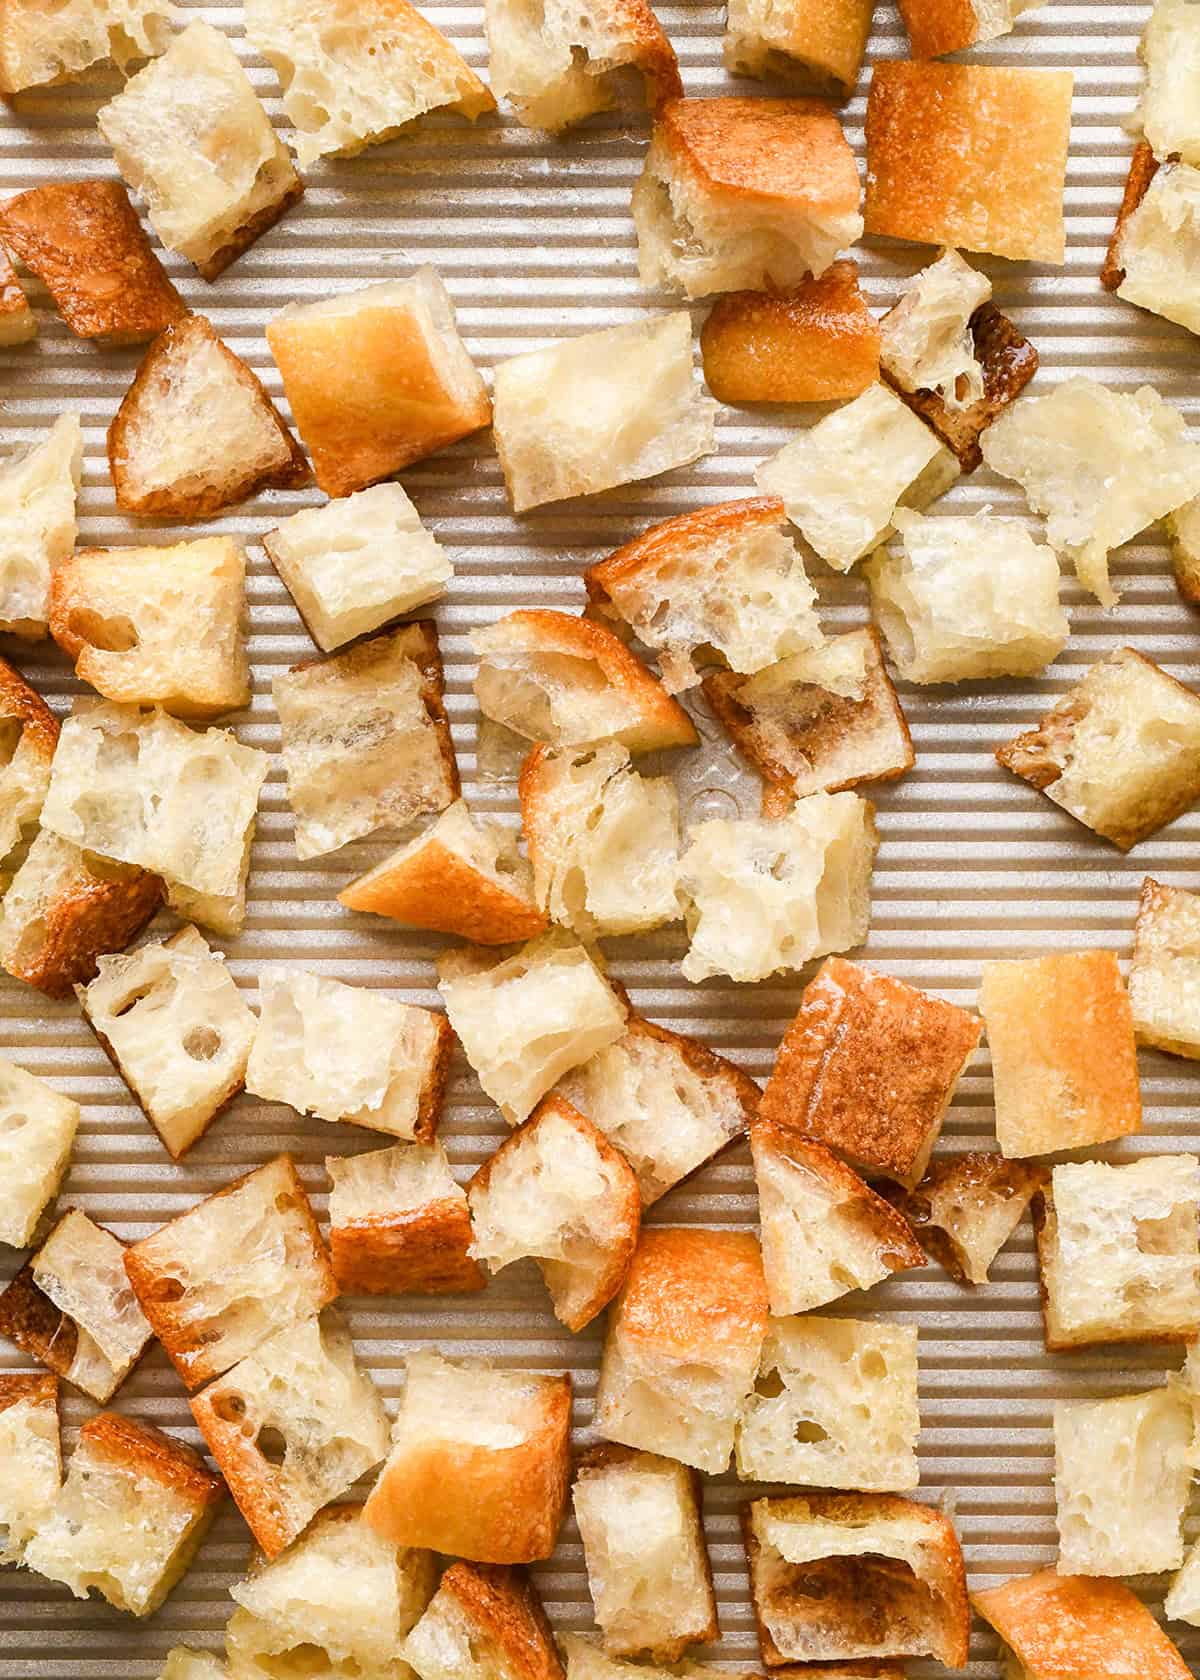 How to Make Croutons - bread spread onto a baking sheet before baking